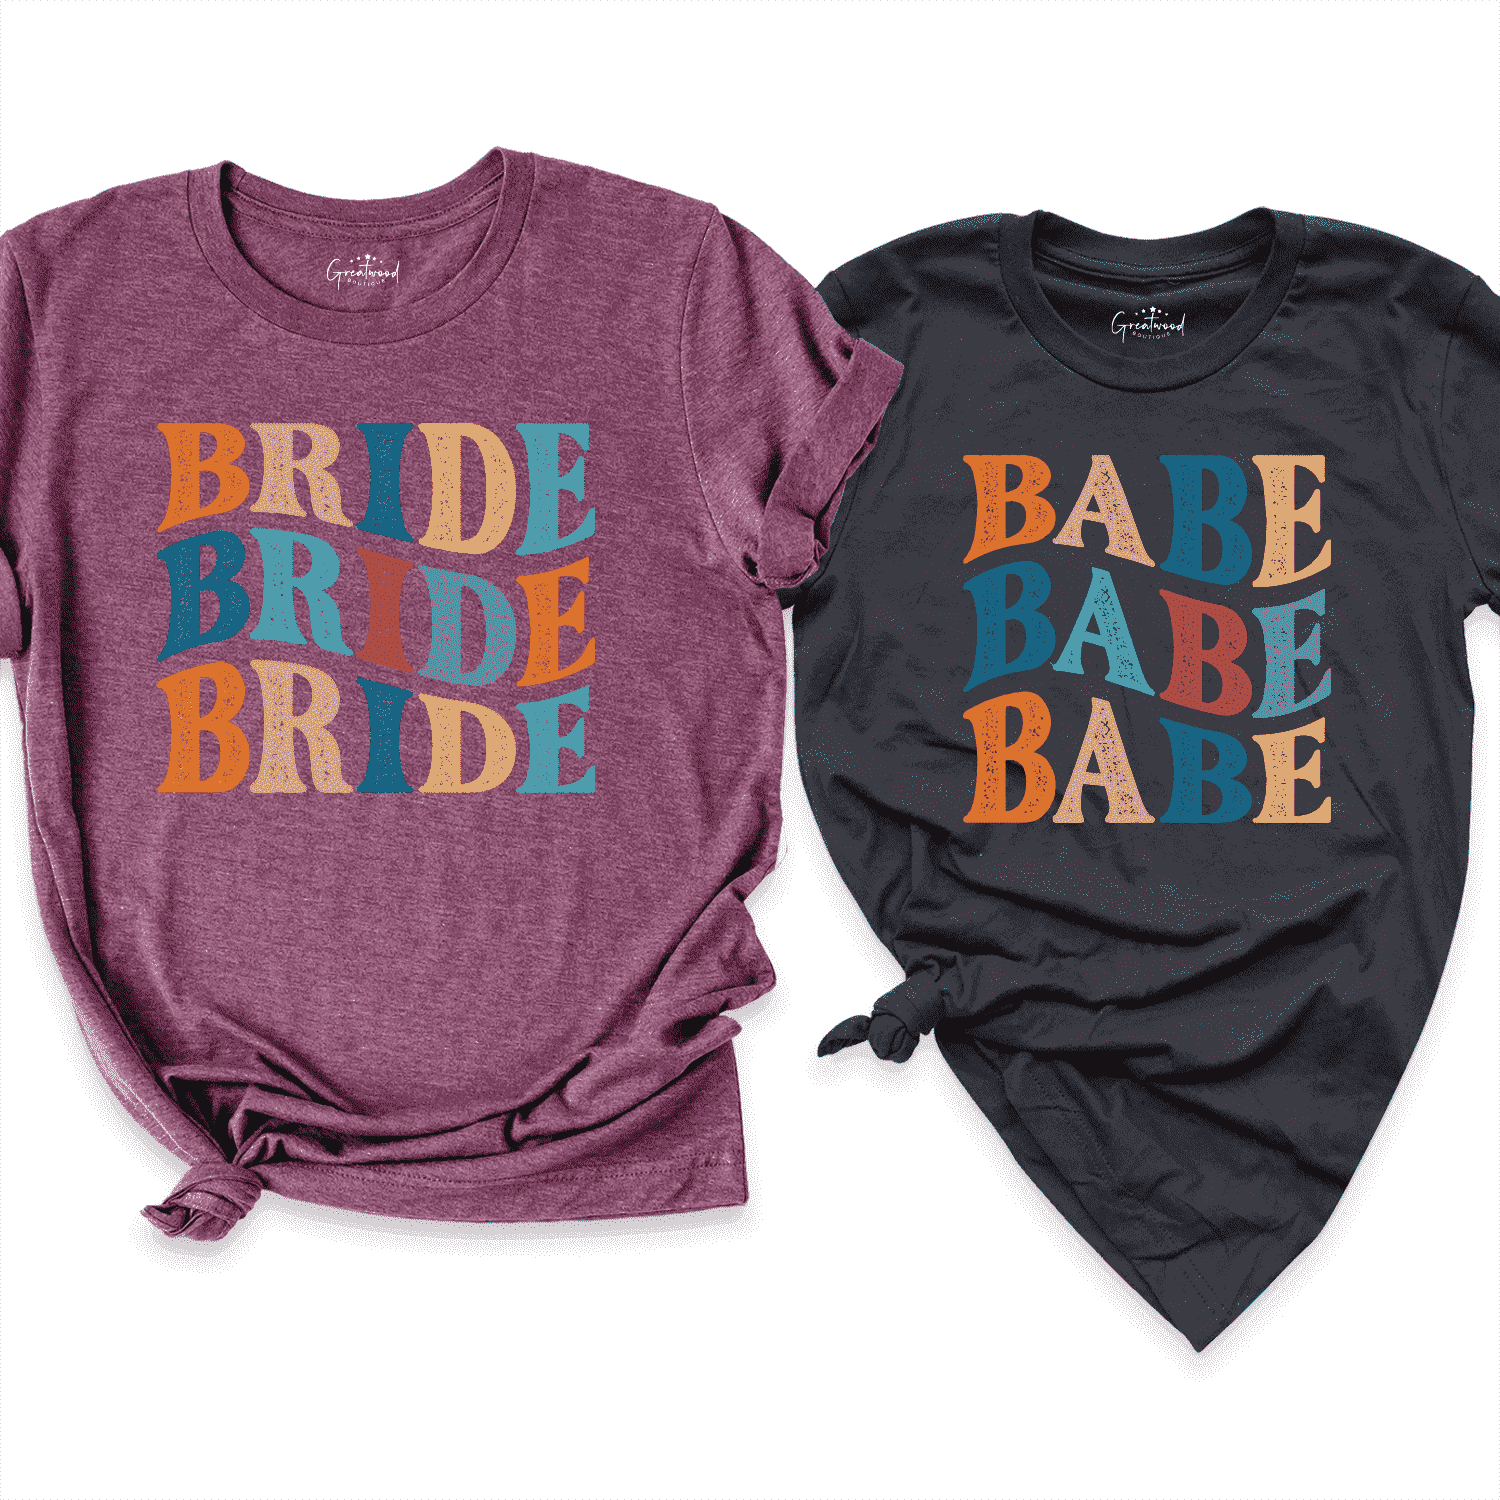 Bride & Babe Shirt Maroon - Greatwood Boutique